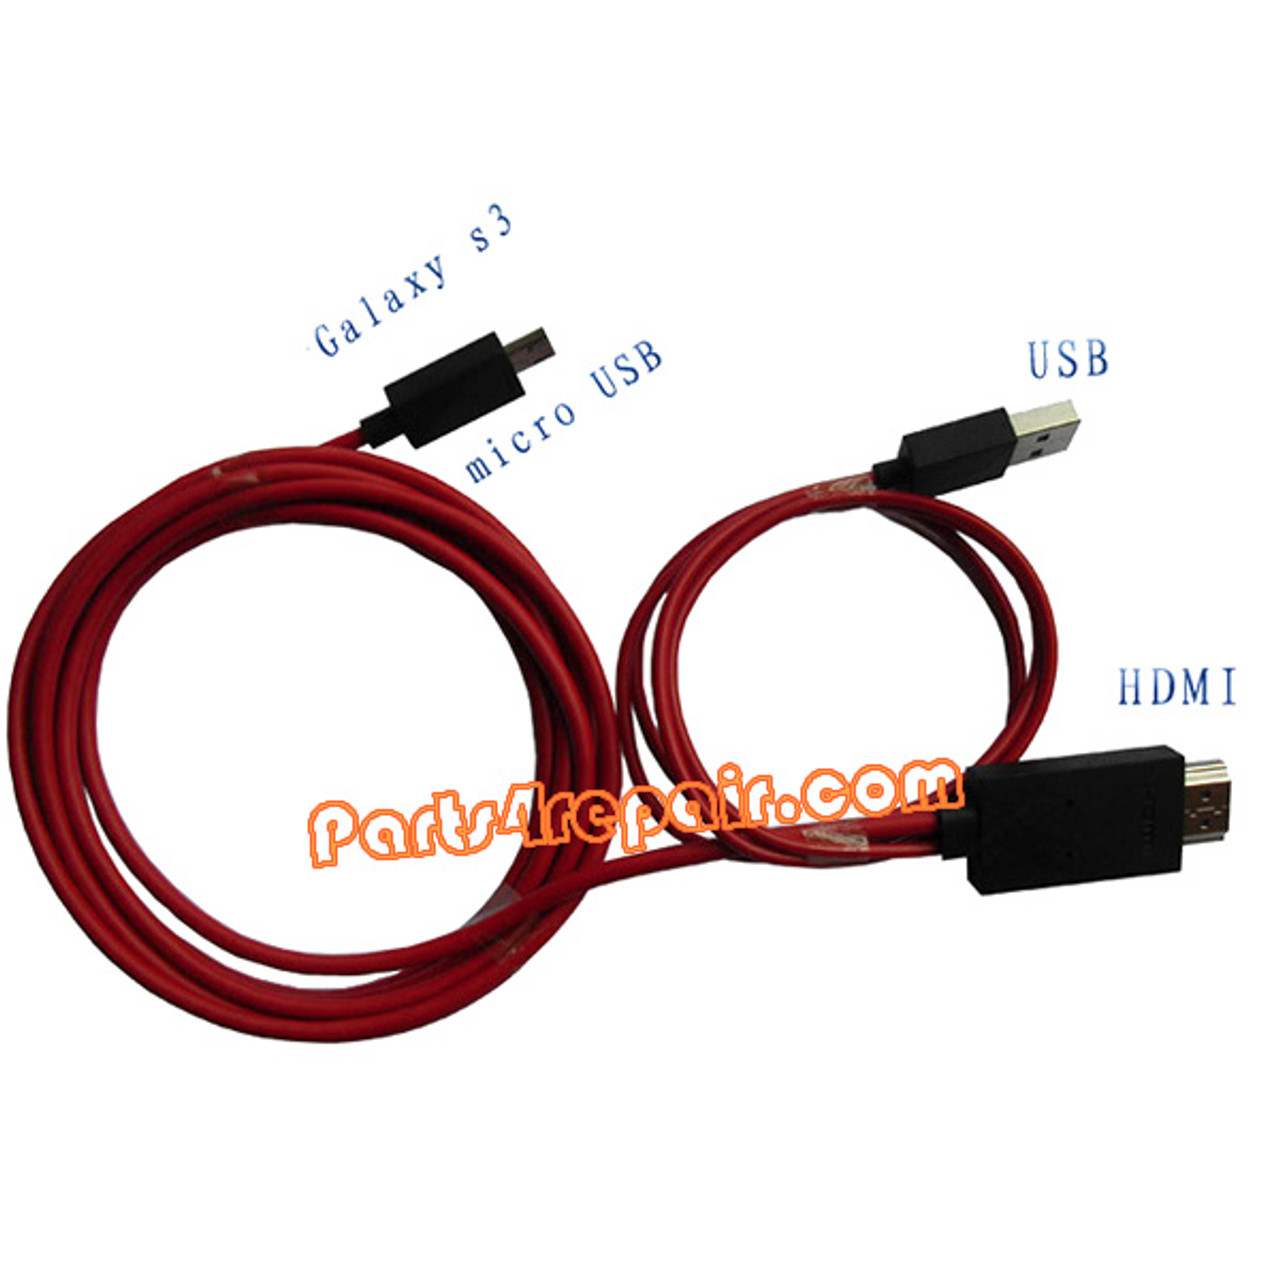 MHL Cable Micro USB to HDMI 2m 